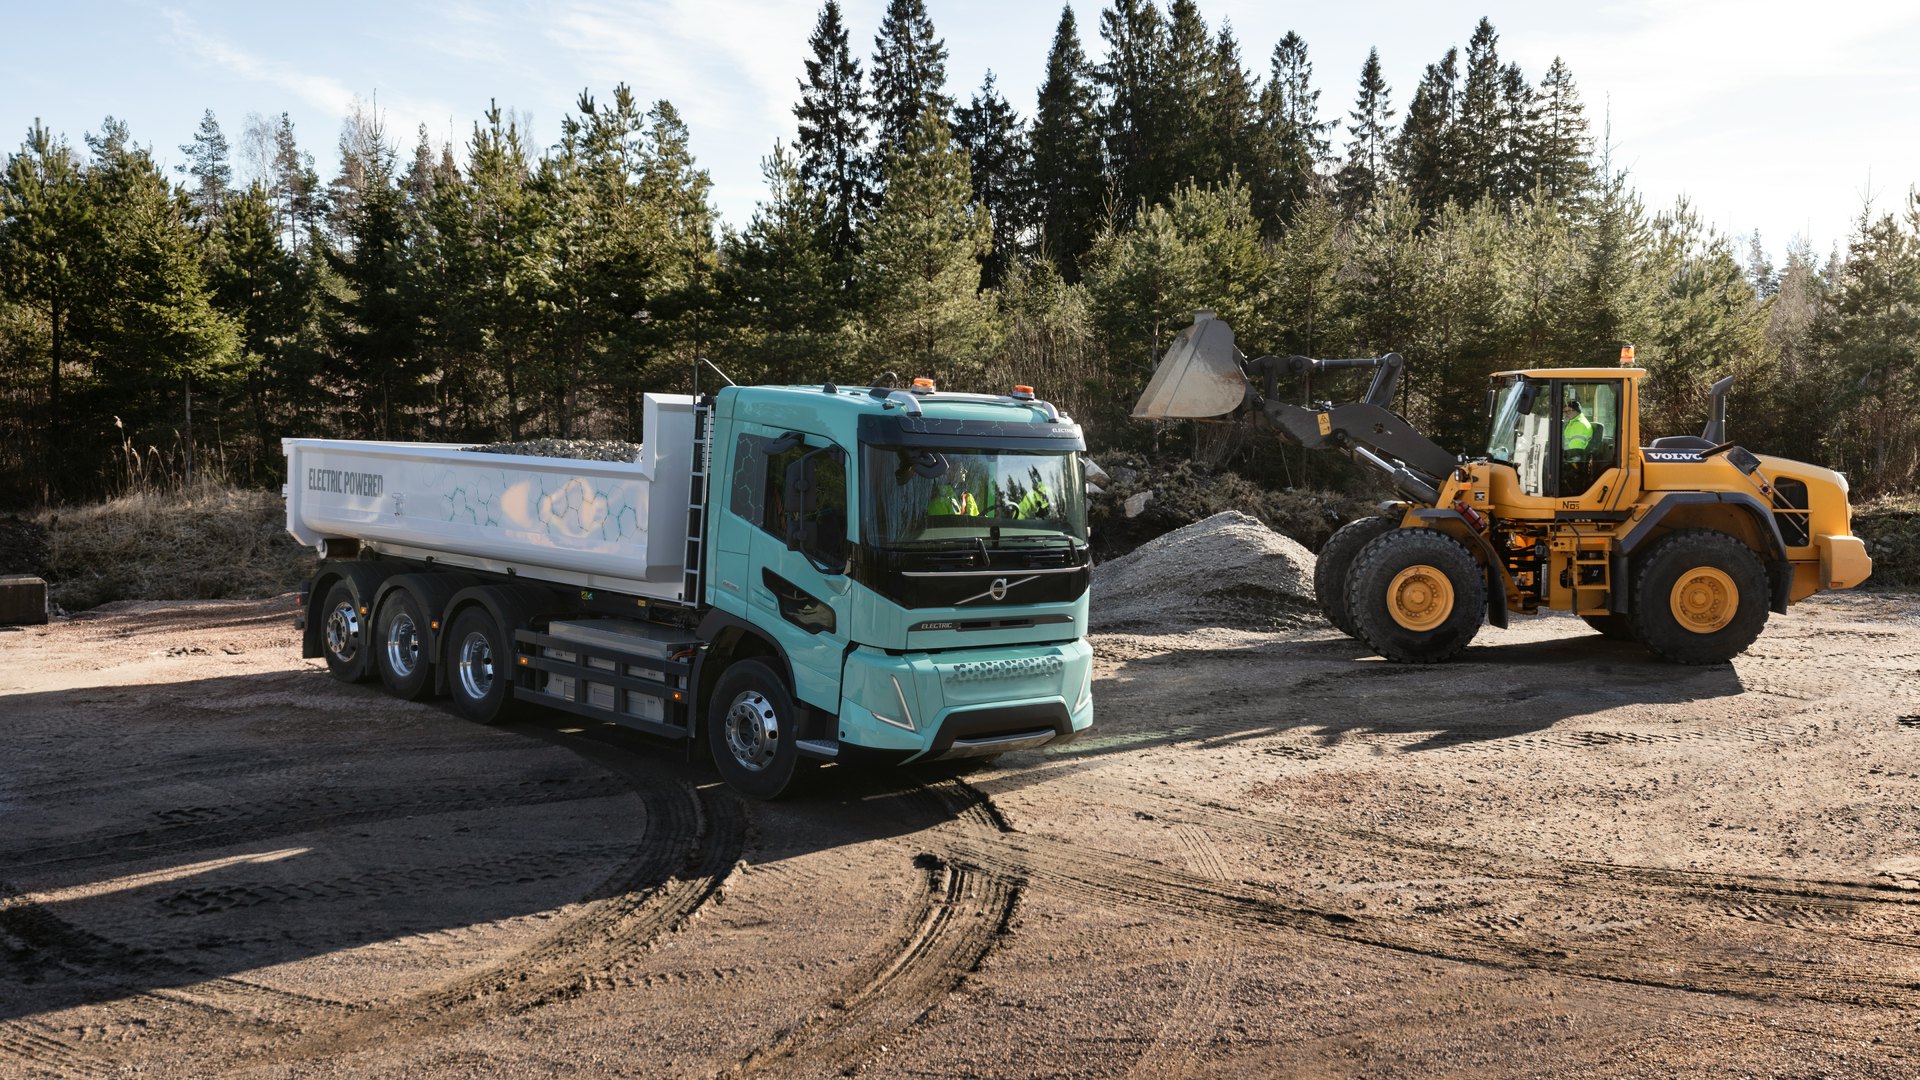 Volvo expands heavy electric truck lineup